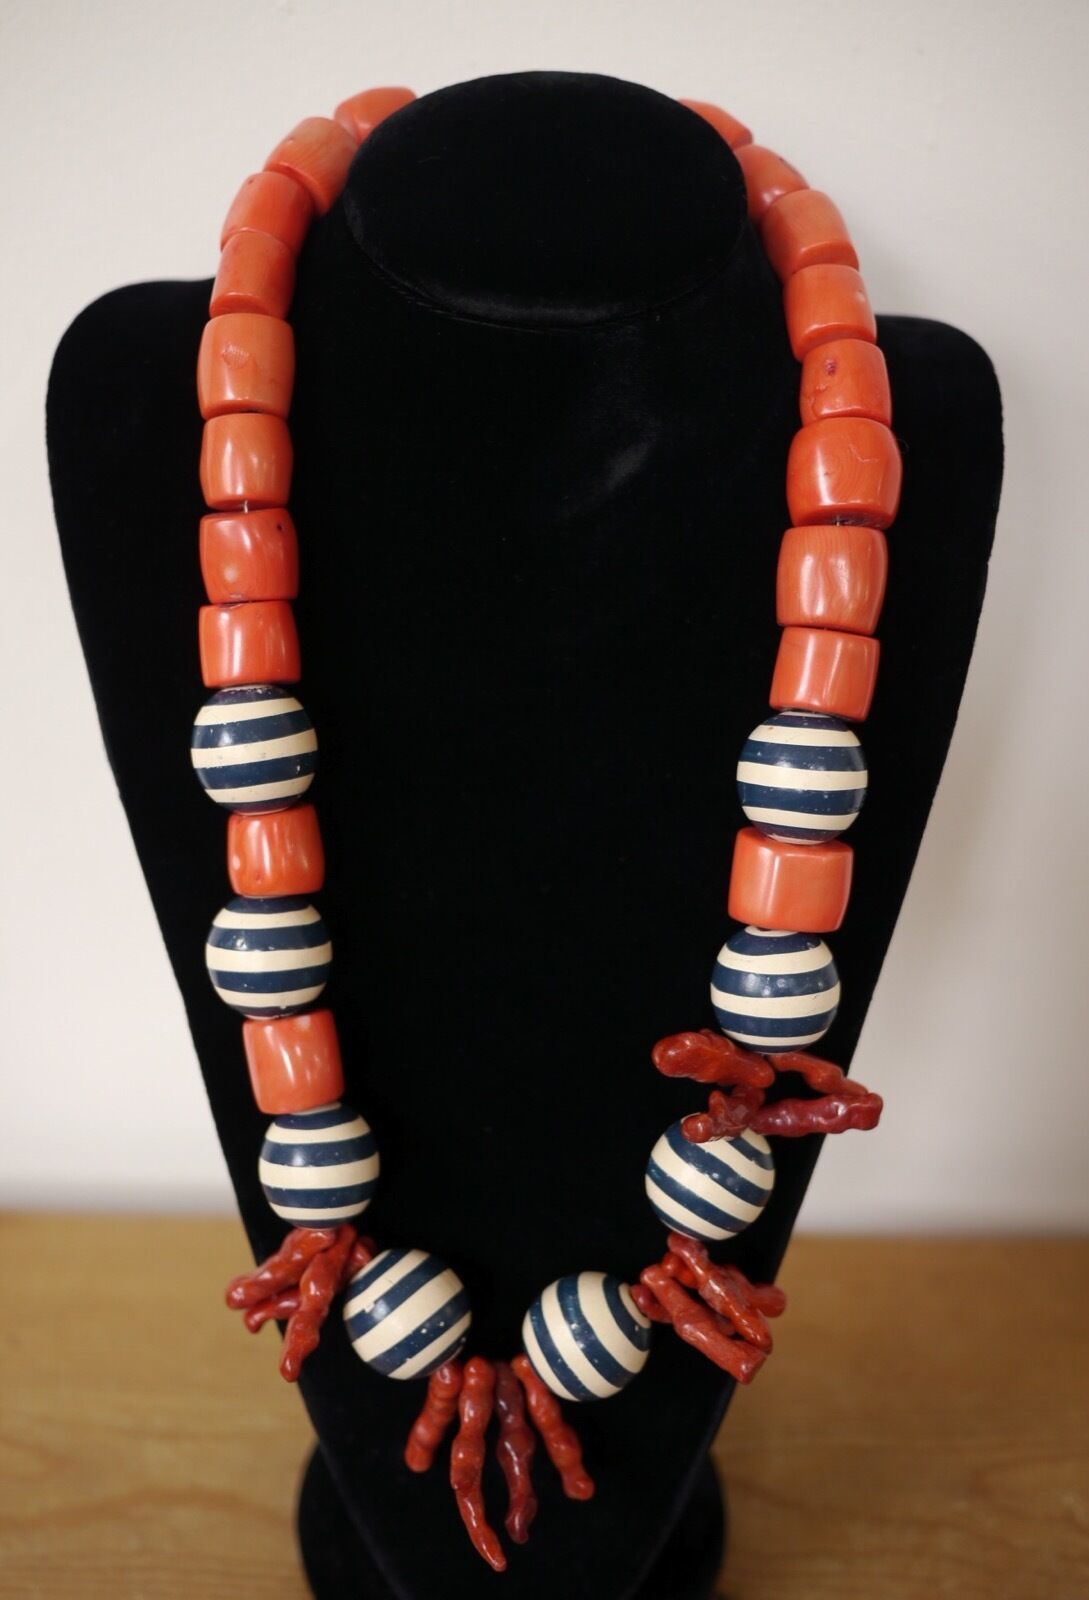 Tory Burch Prototype Real Coral Wood Bead Resort Wear Chunky Statement Necklace - $1,599.00